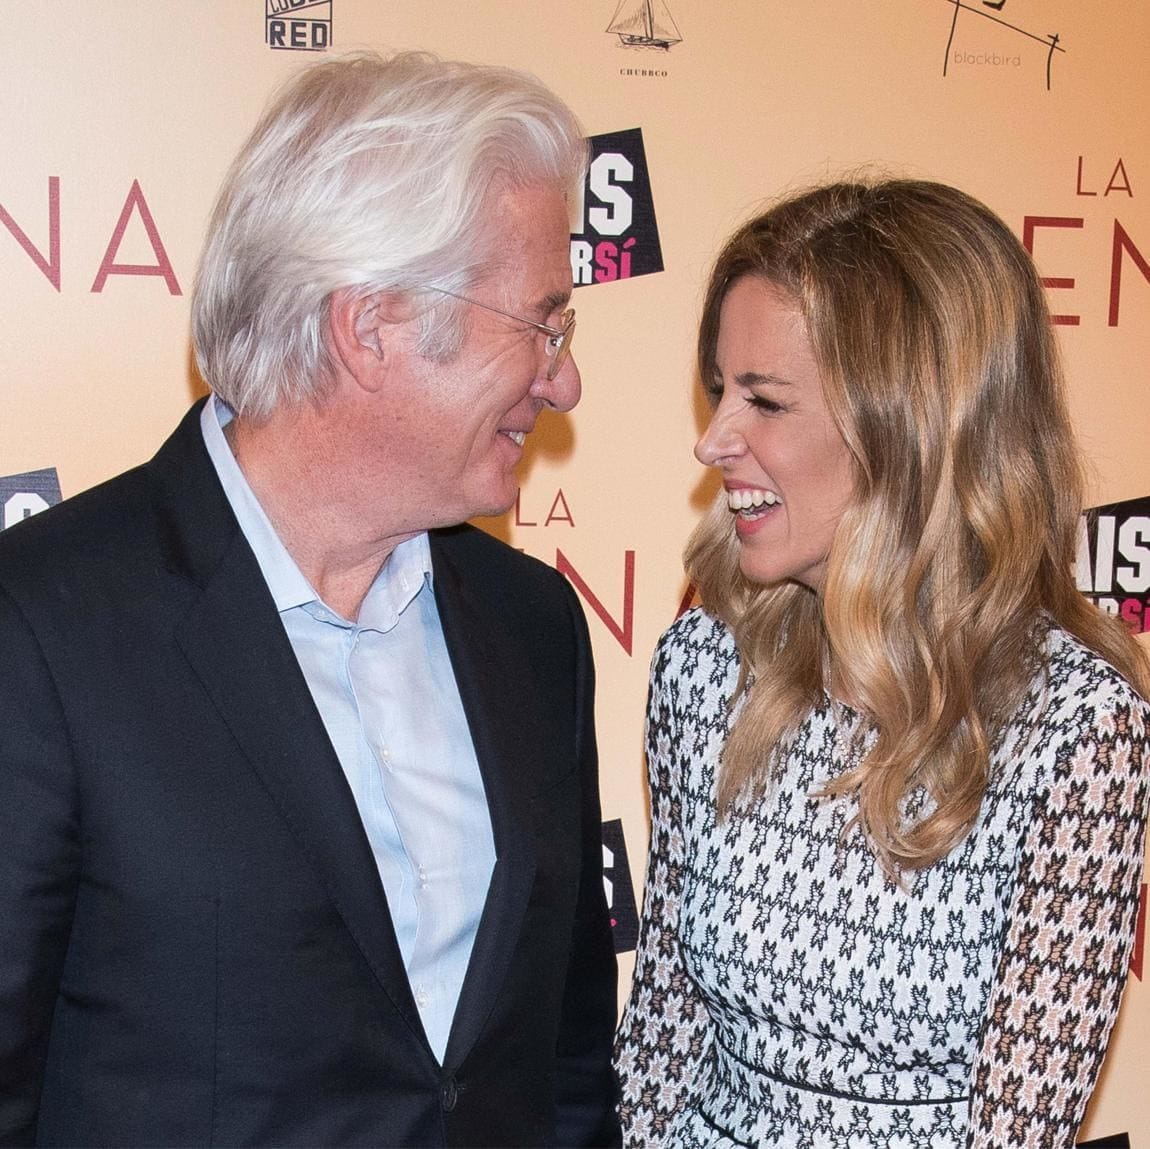 Richard Gere and Alejandra Silva attend the 'The Dinner' movie premiere